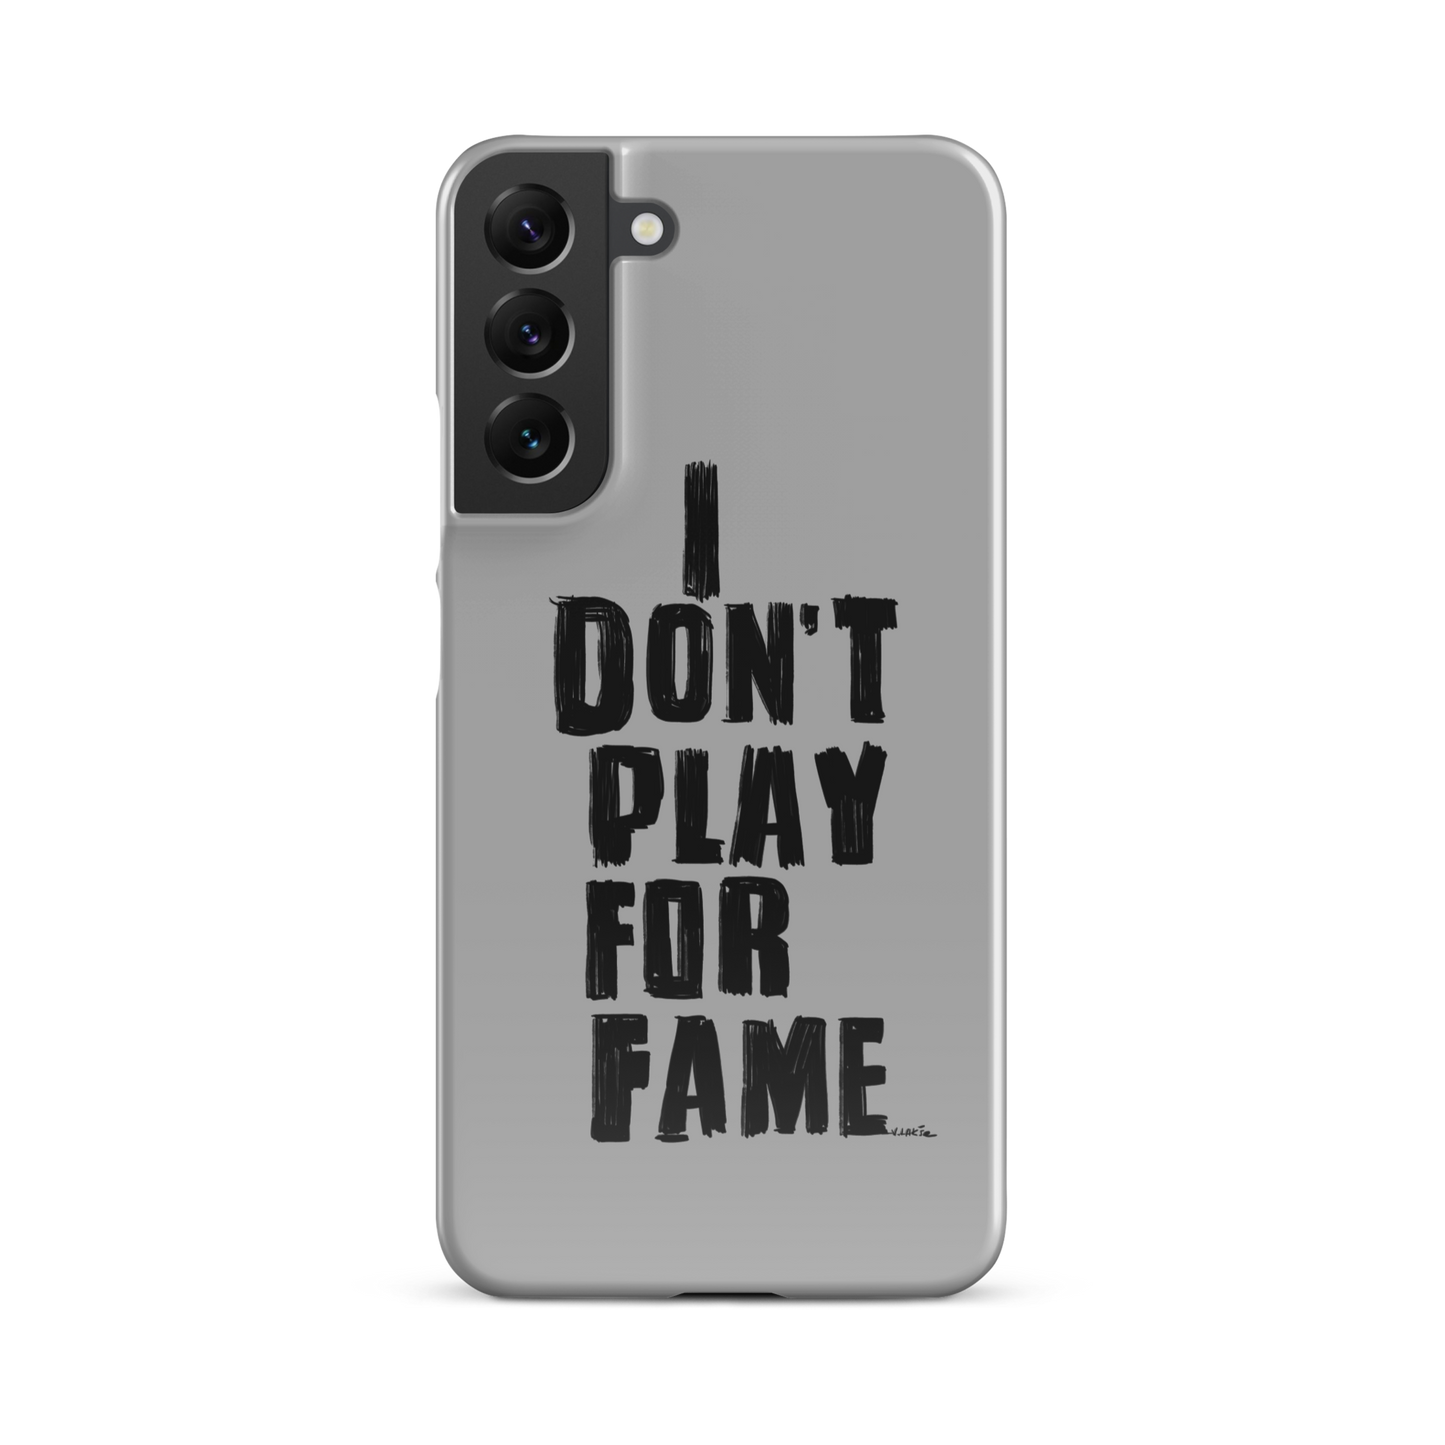 "I DON'T PLAY FOR FAME" by Lakshe. Grey snap case for Samsung®